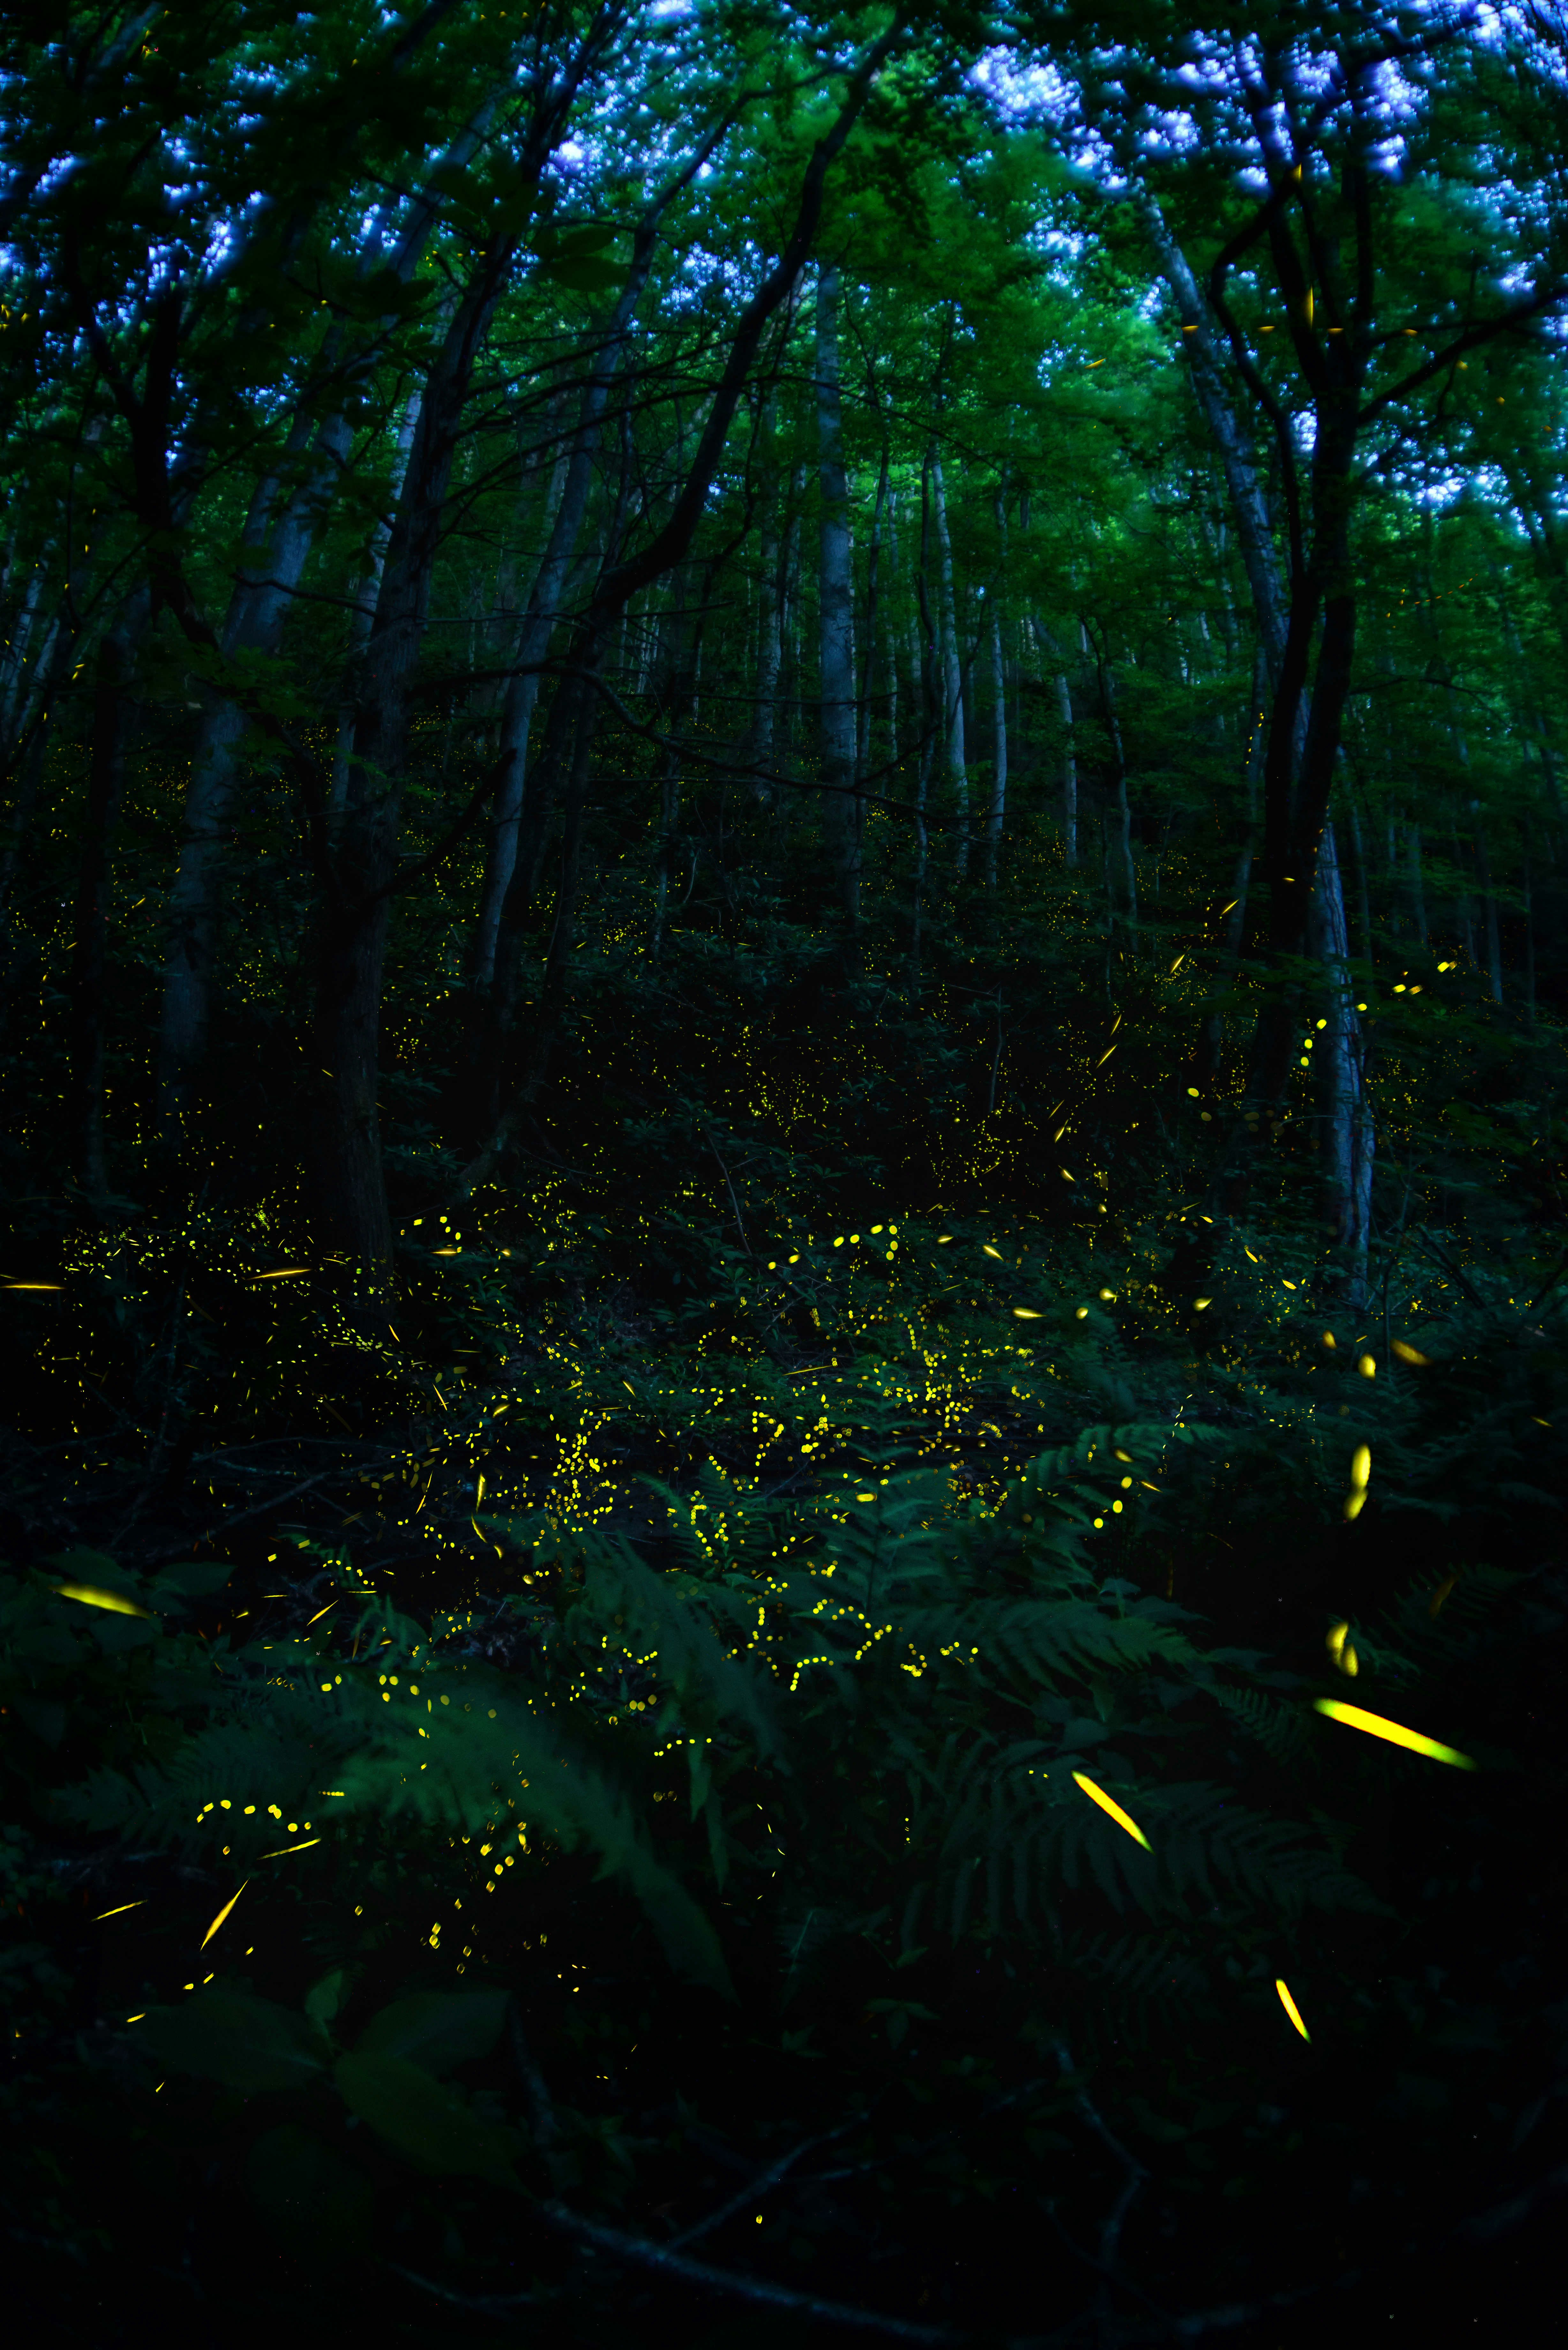 Synchronous fireflies in Great Smoky Mountains, in Tennessee. 